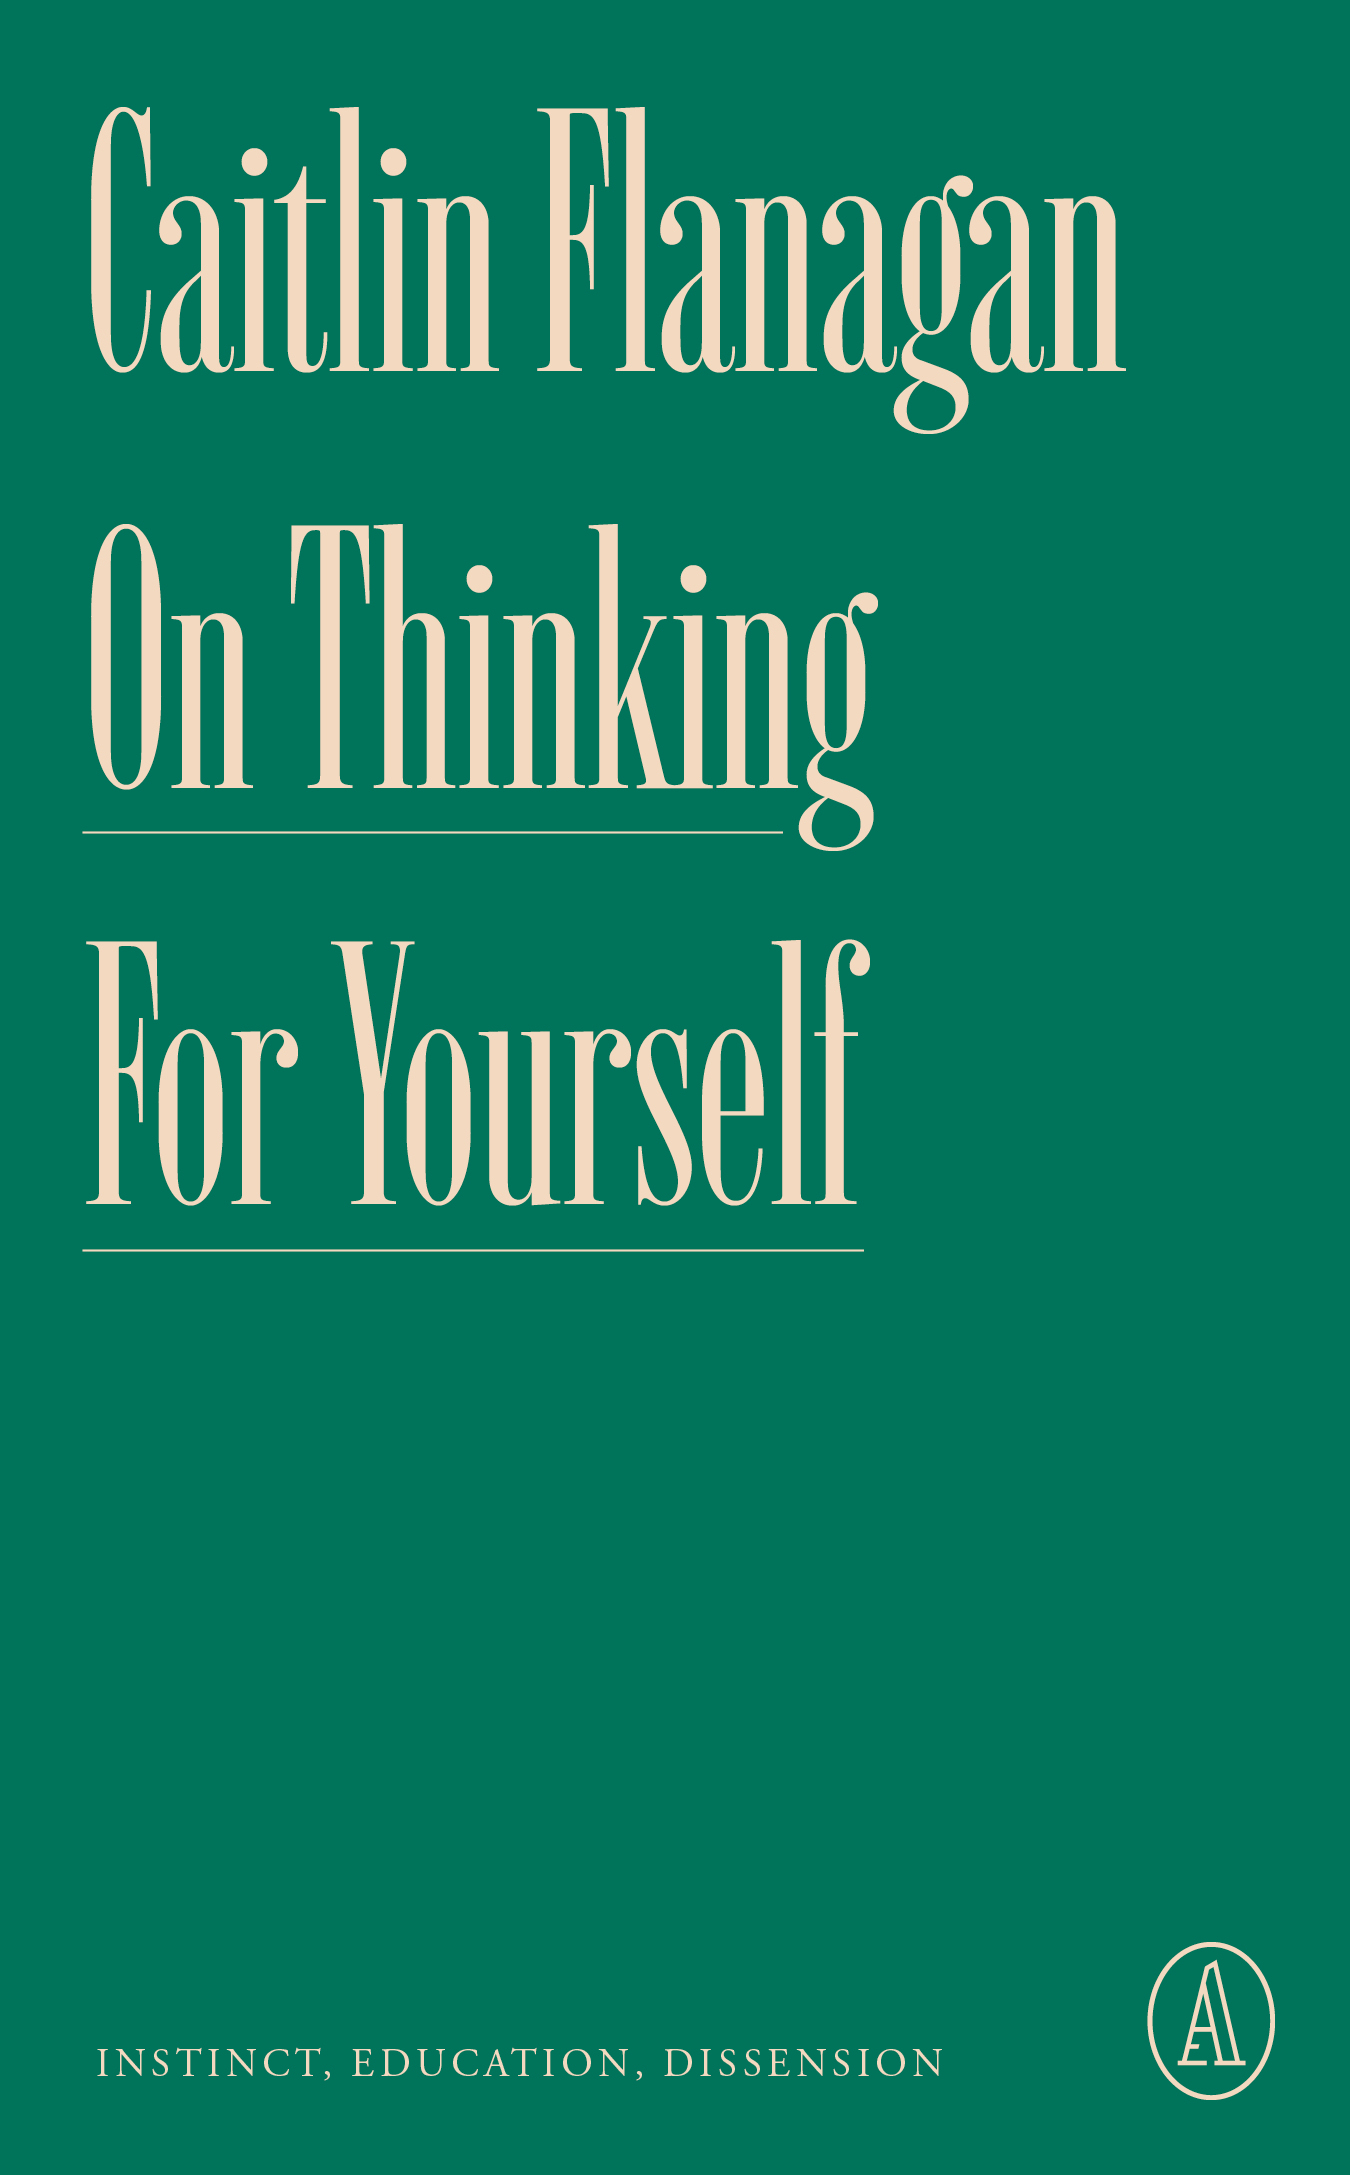 Caitlin Flanagan On Thinking For Yourself